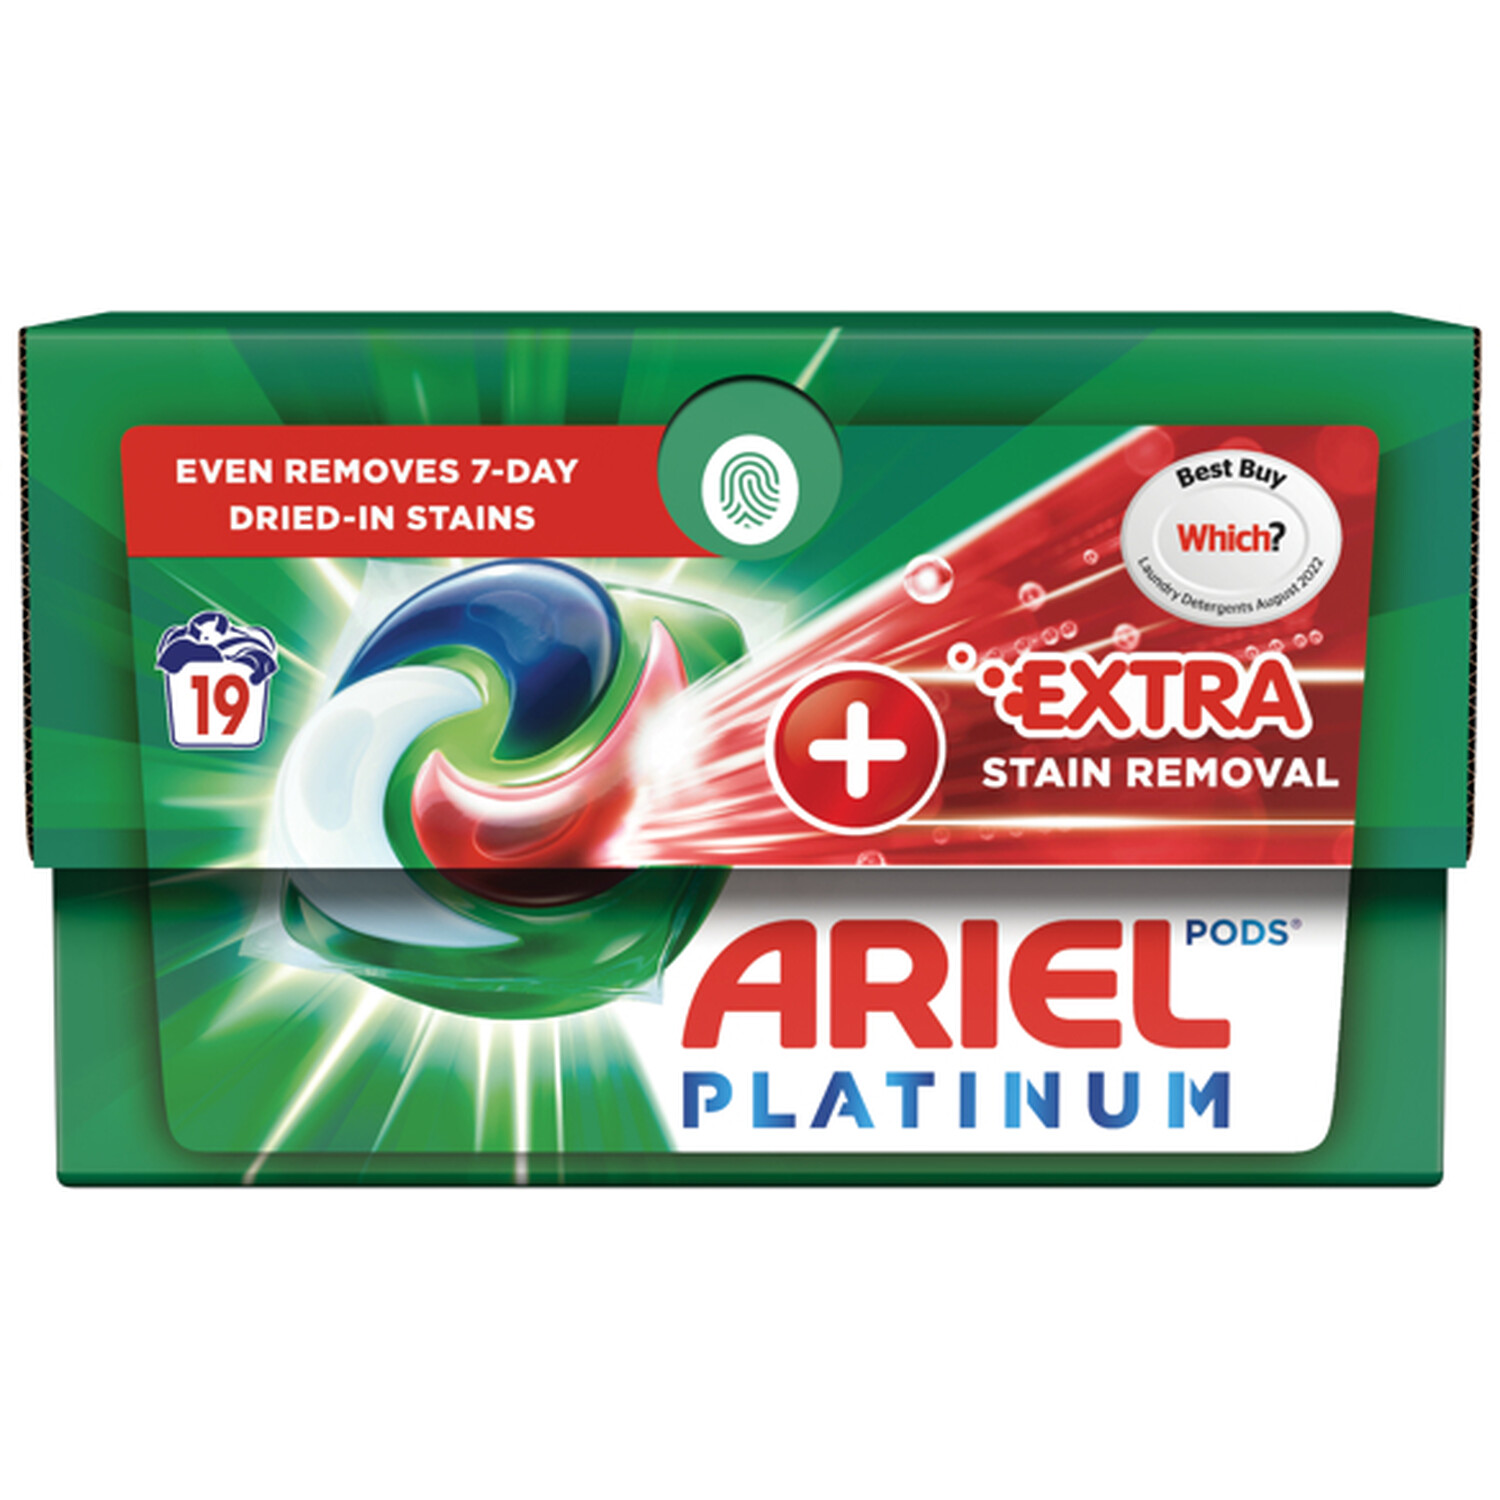 Ariel Platinum Stain Remover Pods 19 Washes Image 1